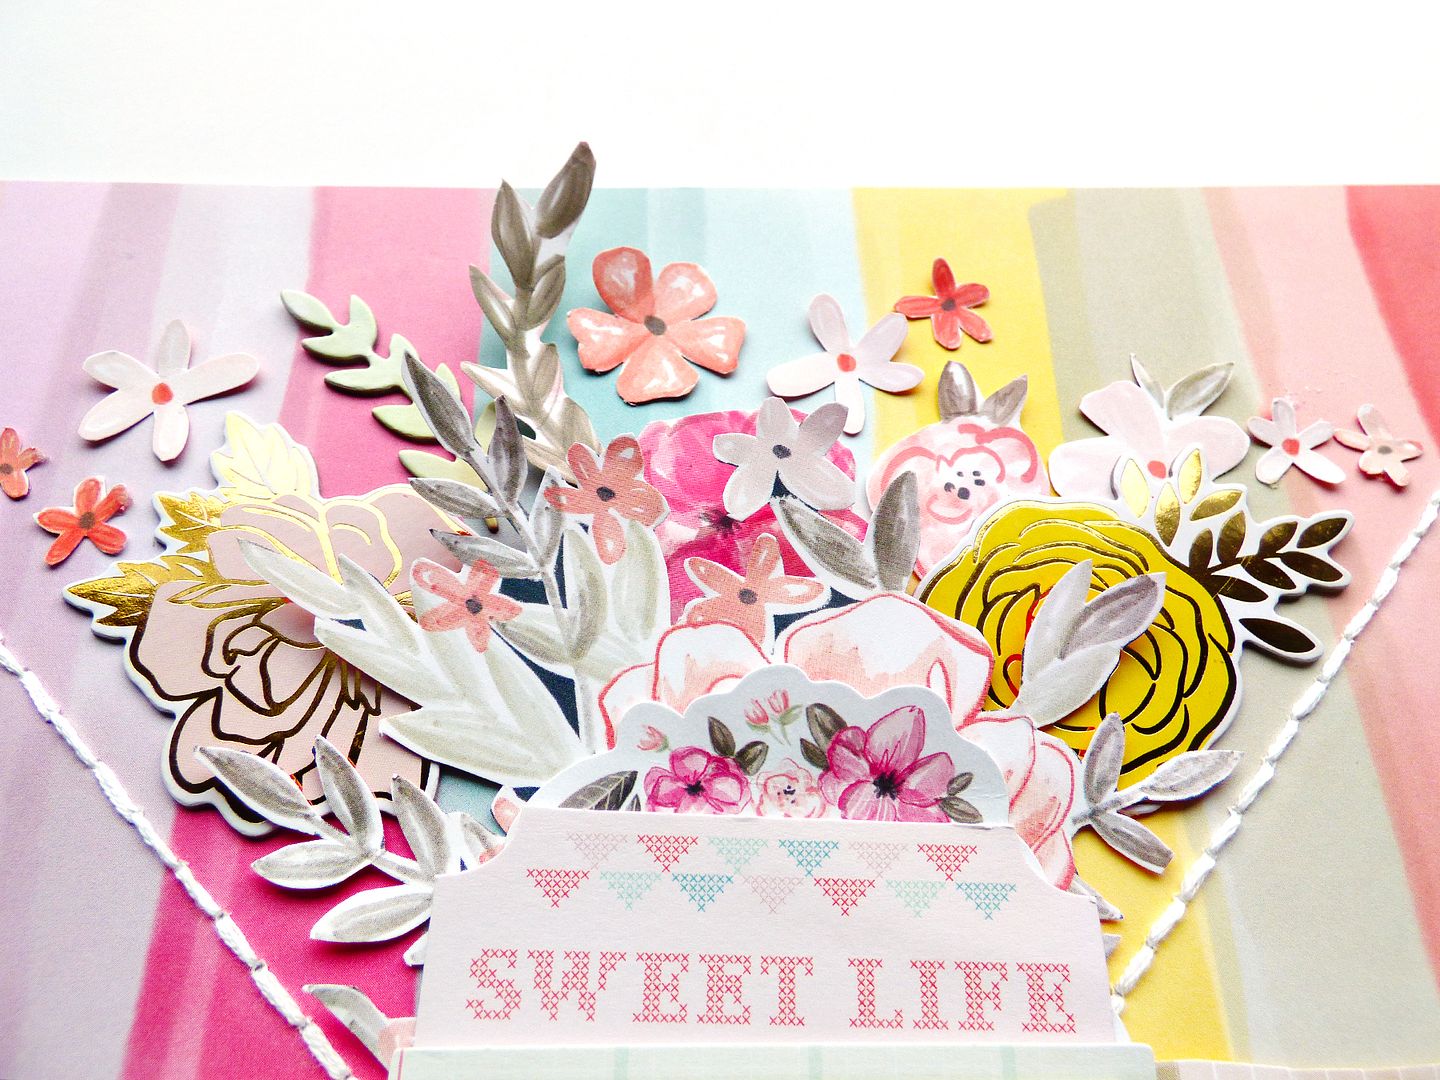  photo BoaF - Sweet Life Detail 1 by Paige Evans.jpg